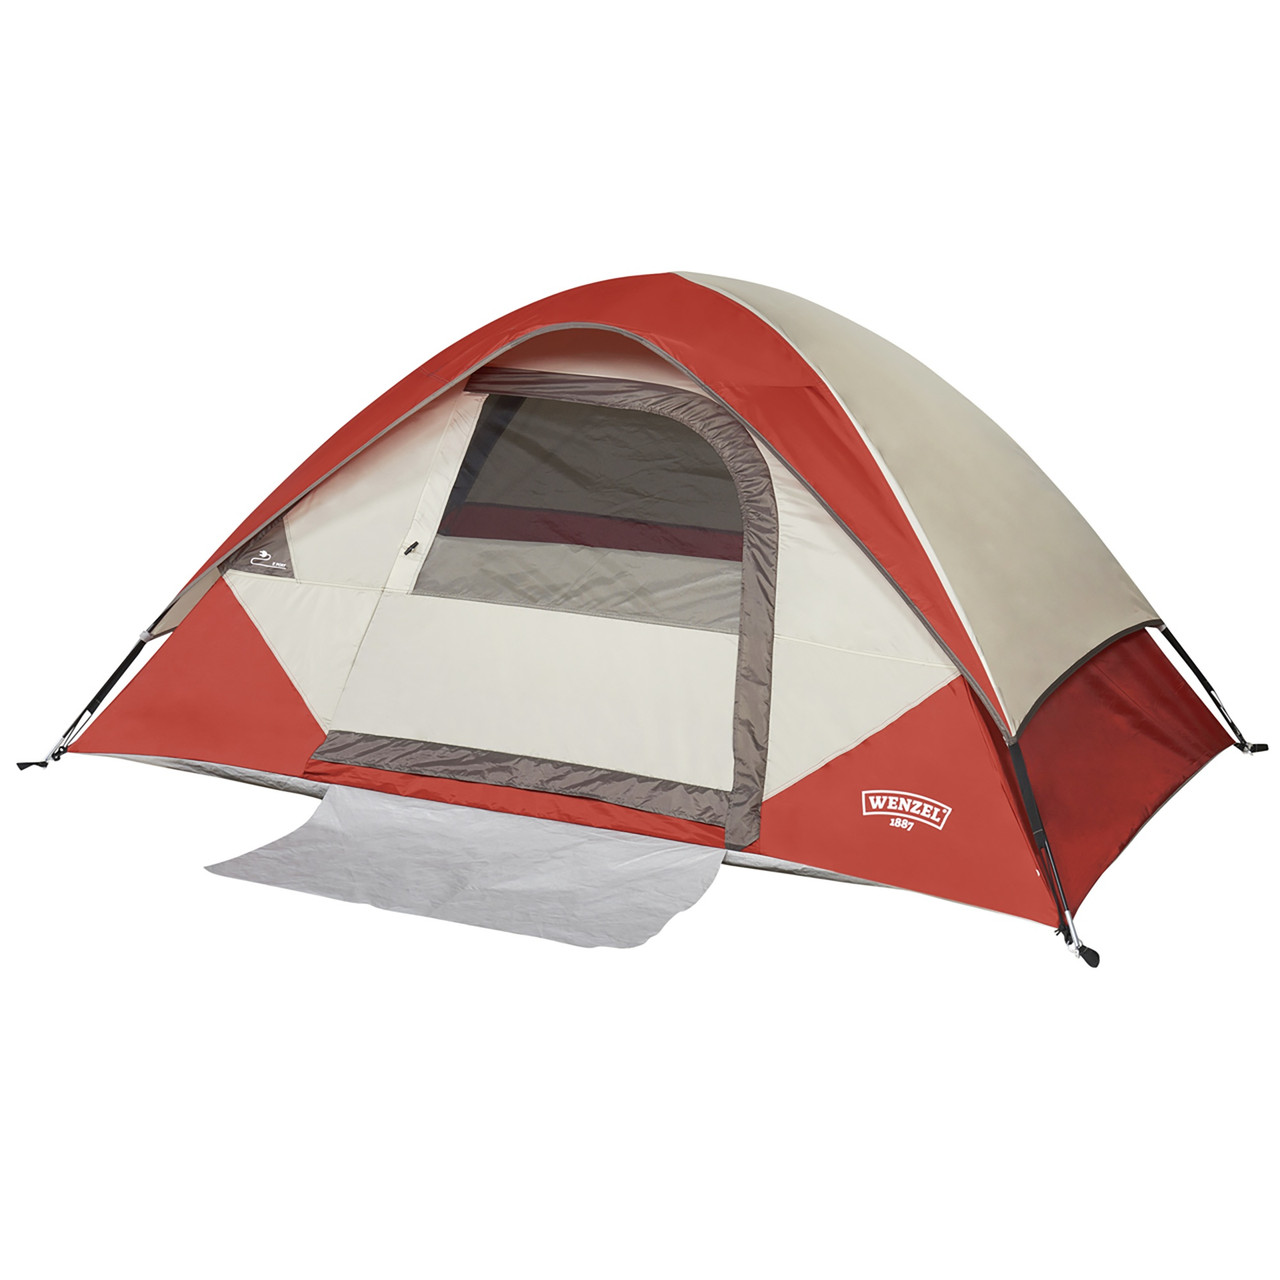 Wenzel Torry 2 Person Dome Tent, red/white, front view, with fly attached